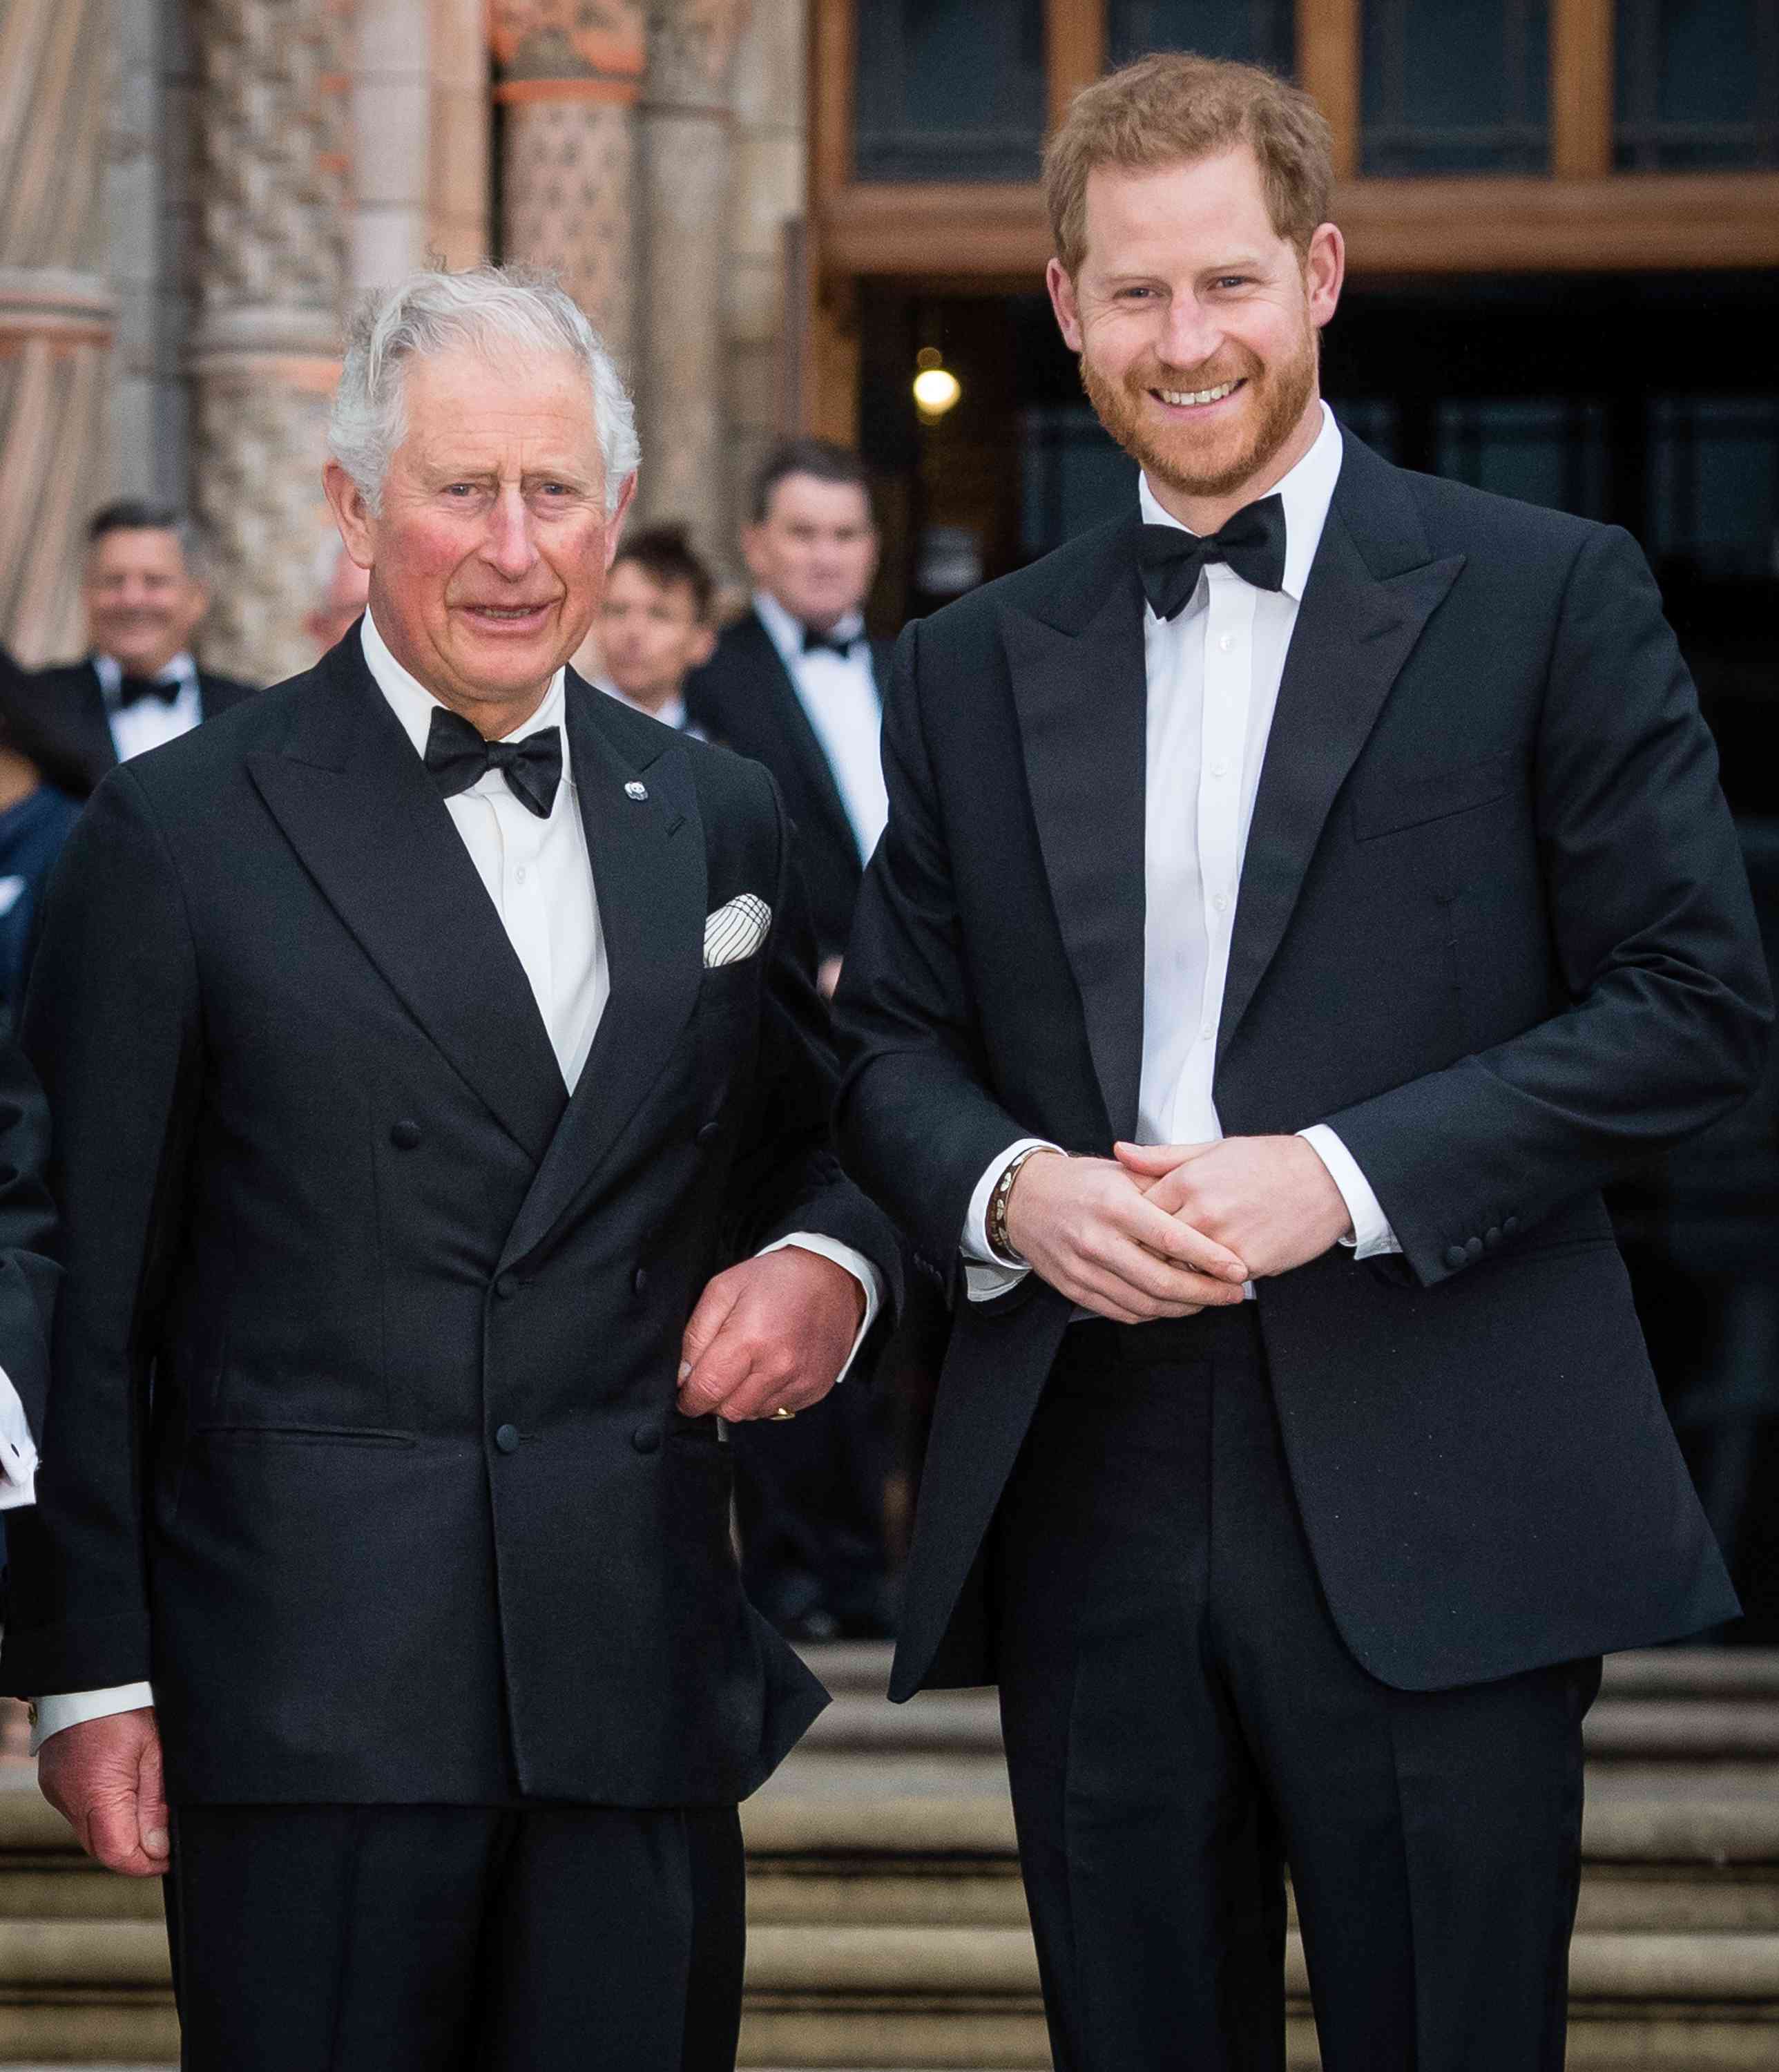 Why Prince Harry Turned Down a Meeting With King Charles and Royal Residence Stay